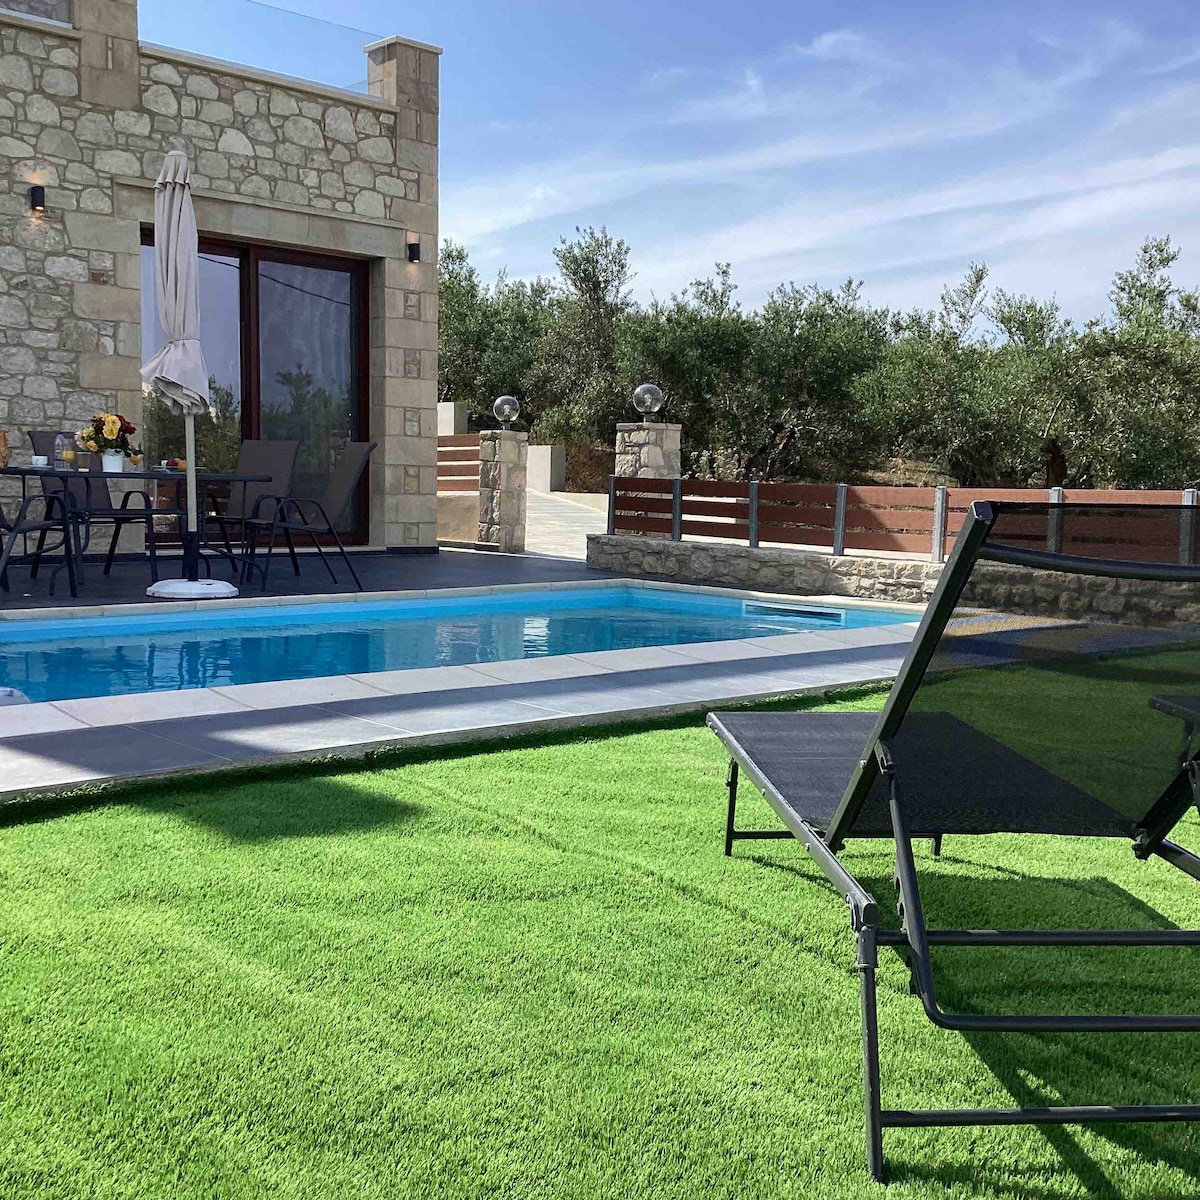 Lithina Villa with Private Pool